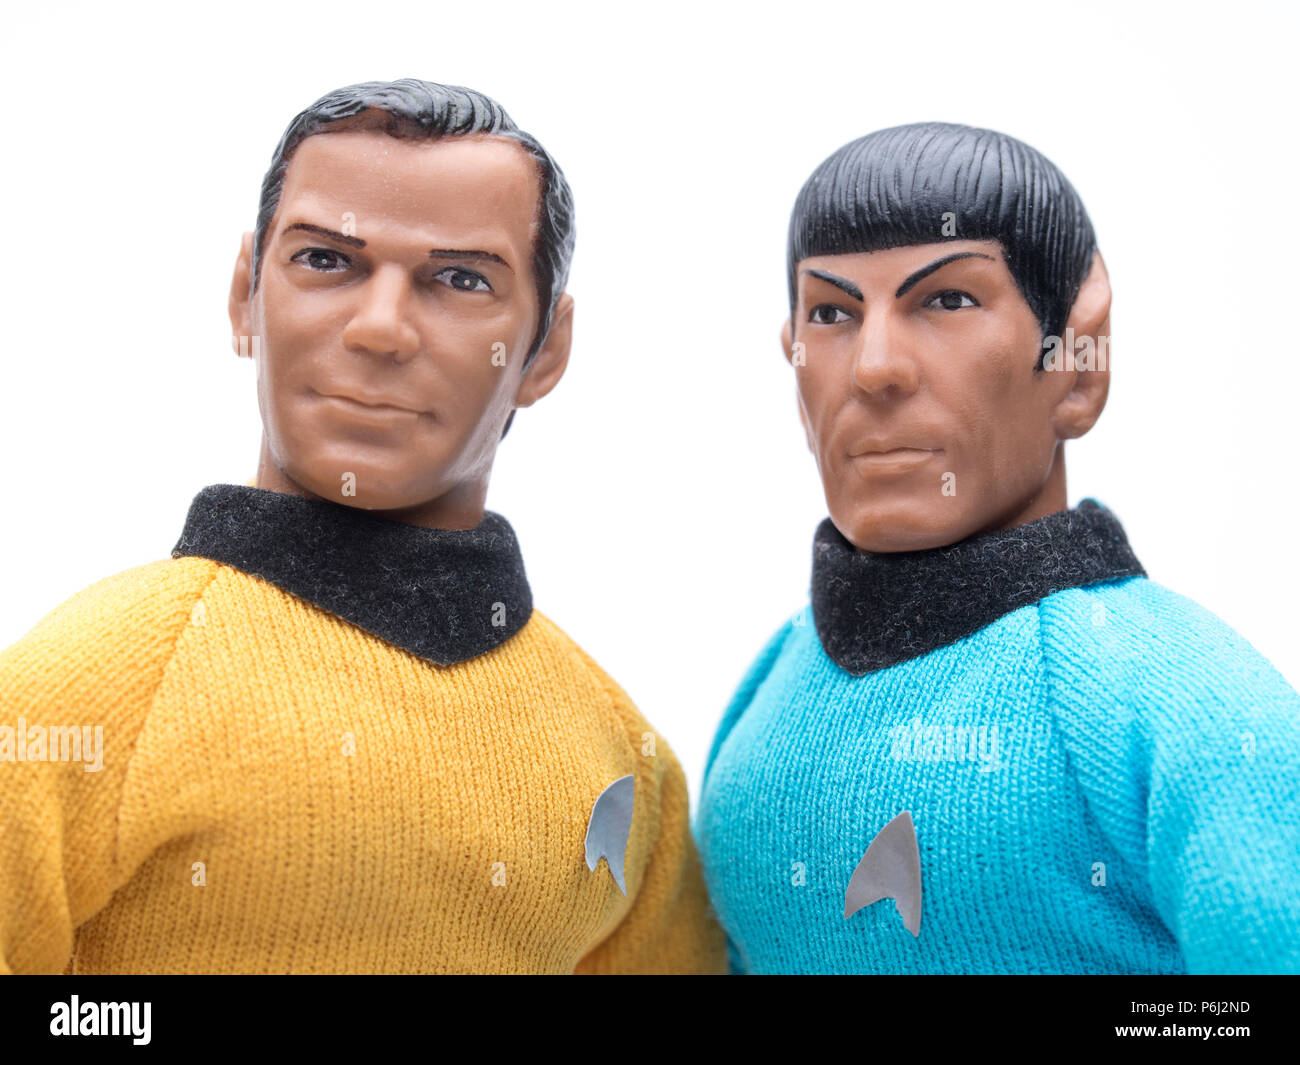 1974 MEGO Star Trek Captain Kirk and Mr. Spock Action Figure with phaser and communicator. Stock Photo